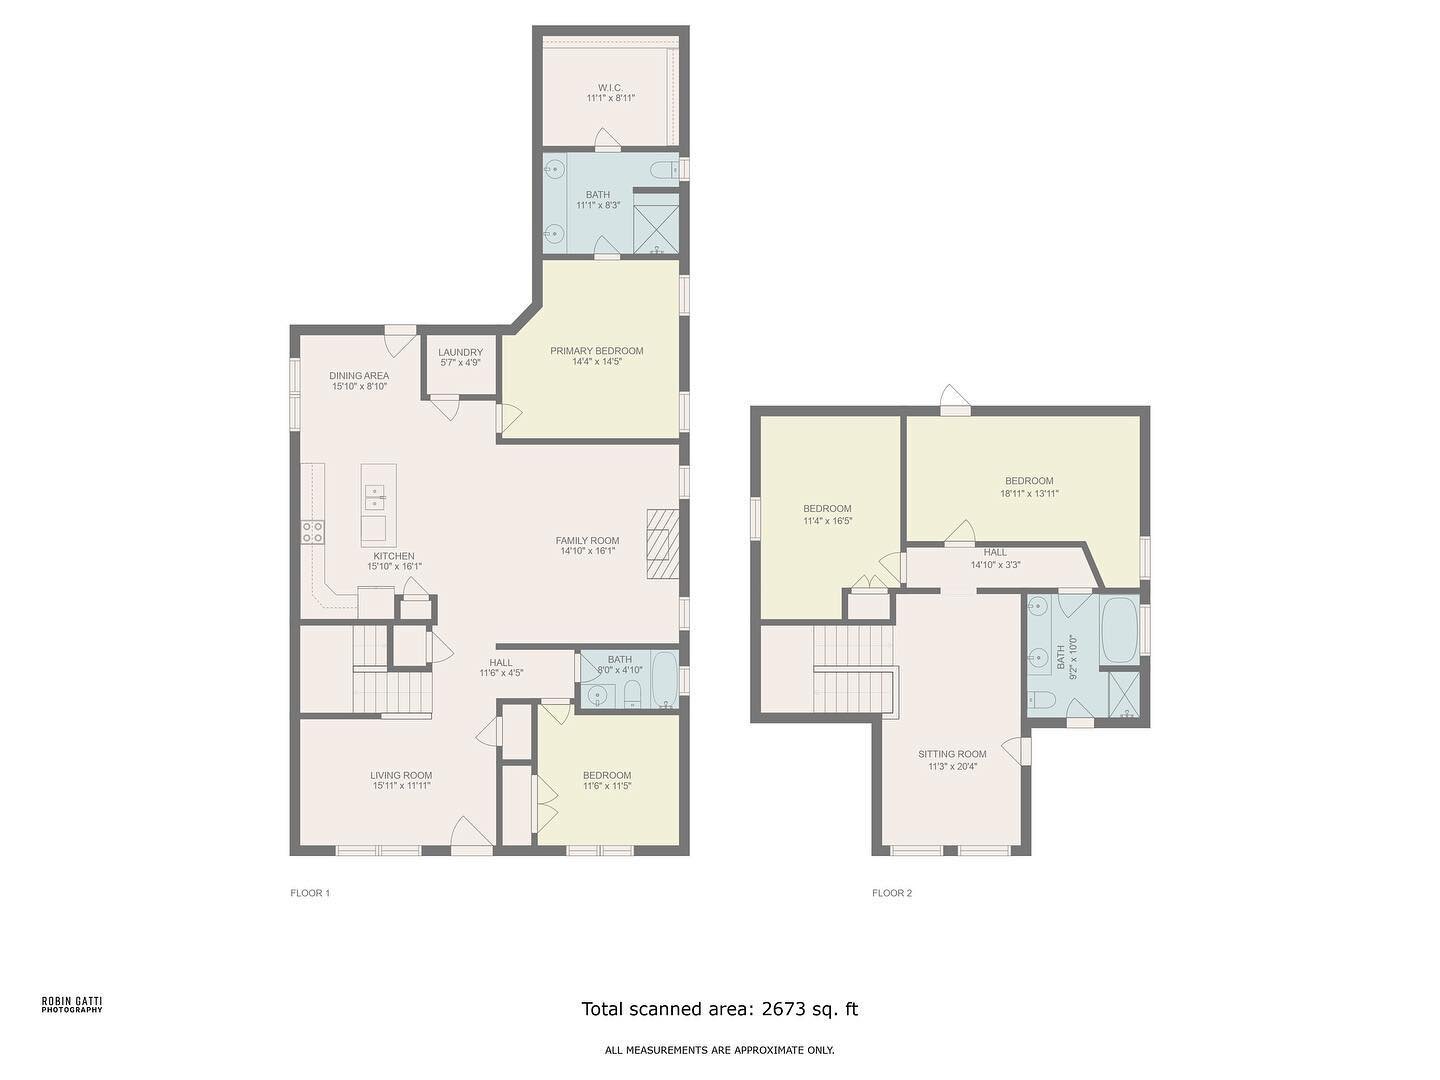 It is always fun doing these floor plans. It should be added on to your marketing bookings as a perfect top off to show buyers the layout of their potential new home!